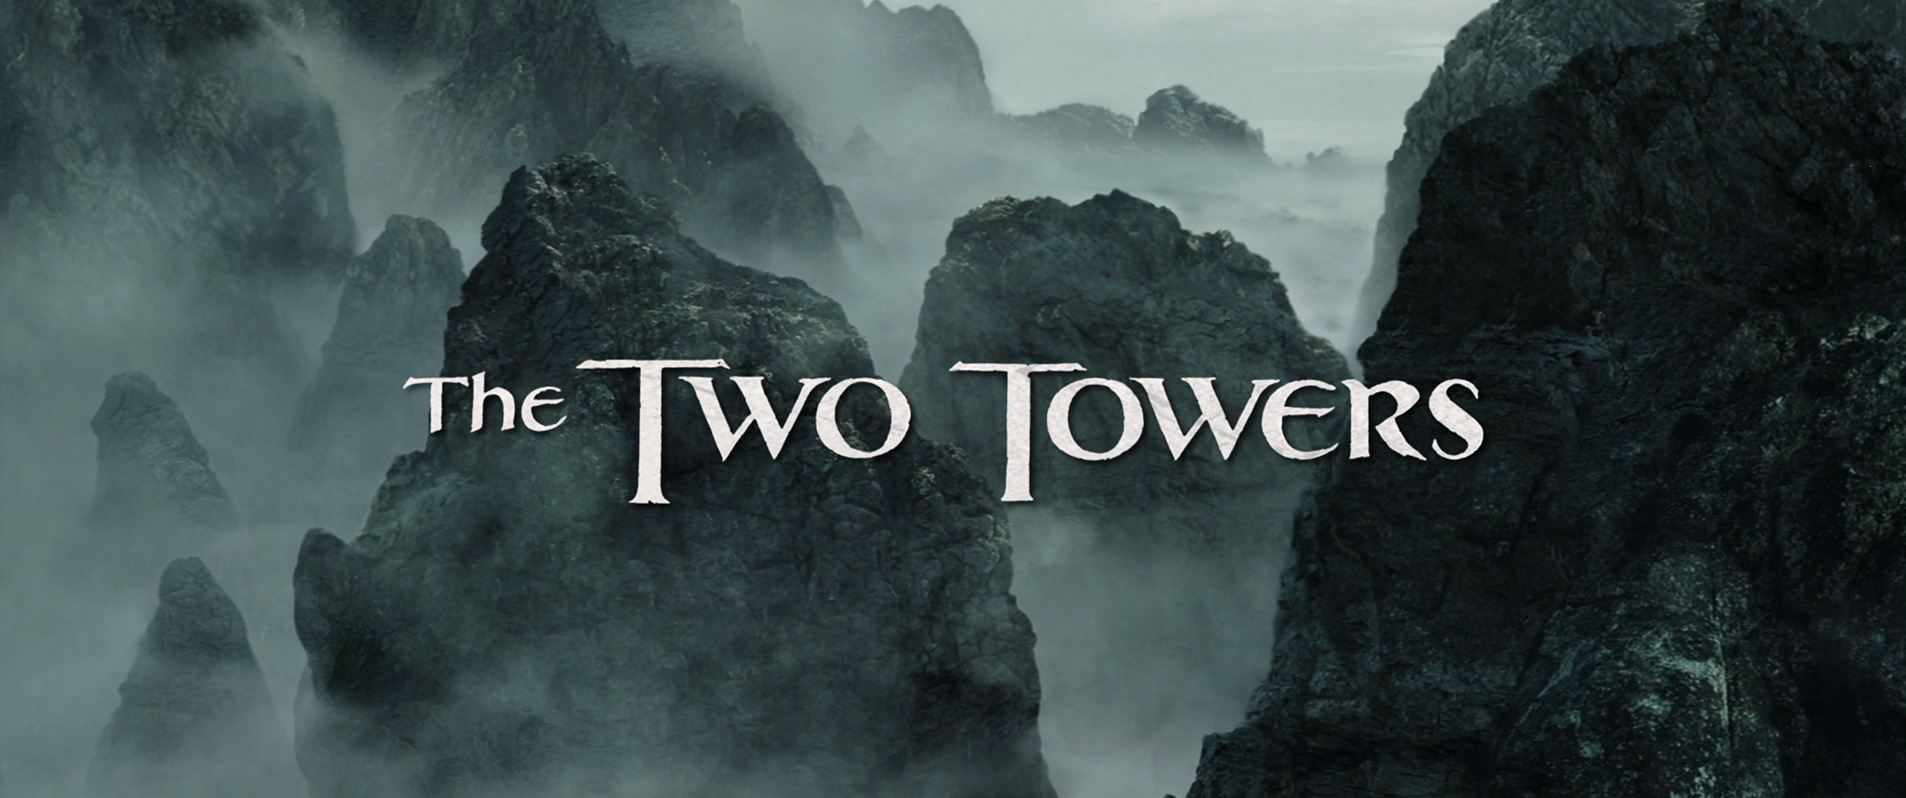 The Lord Of The Rings: The Two Towers Backgrounds, Compatible - PC, Mobile, Gadgets| 1906x798 px